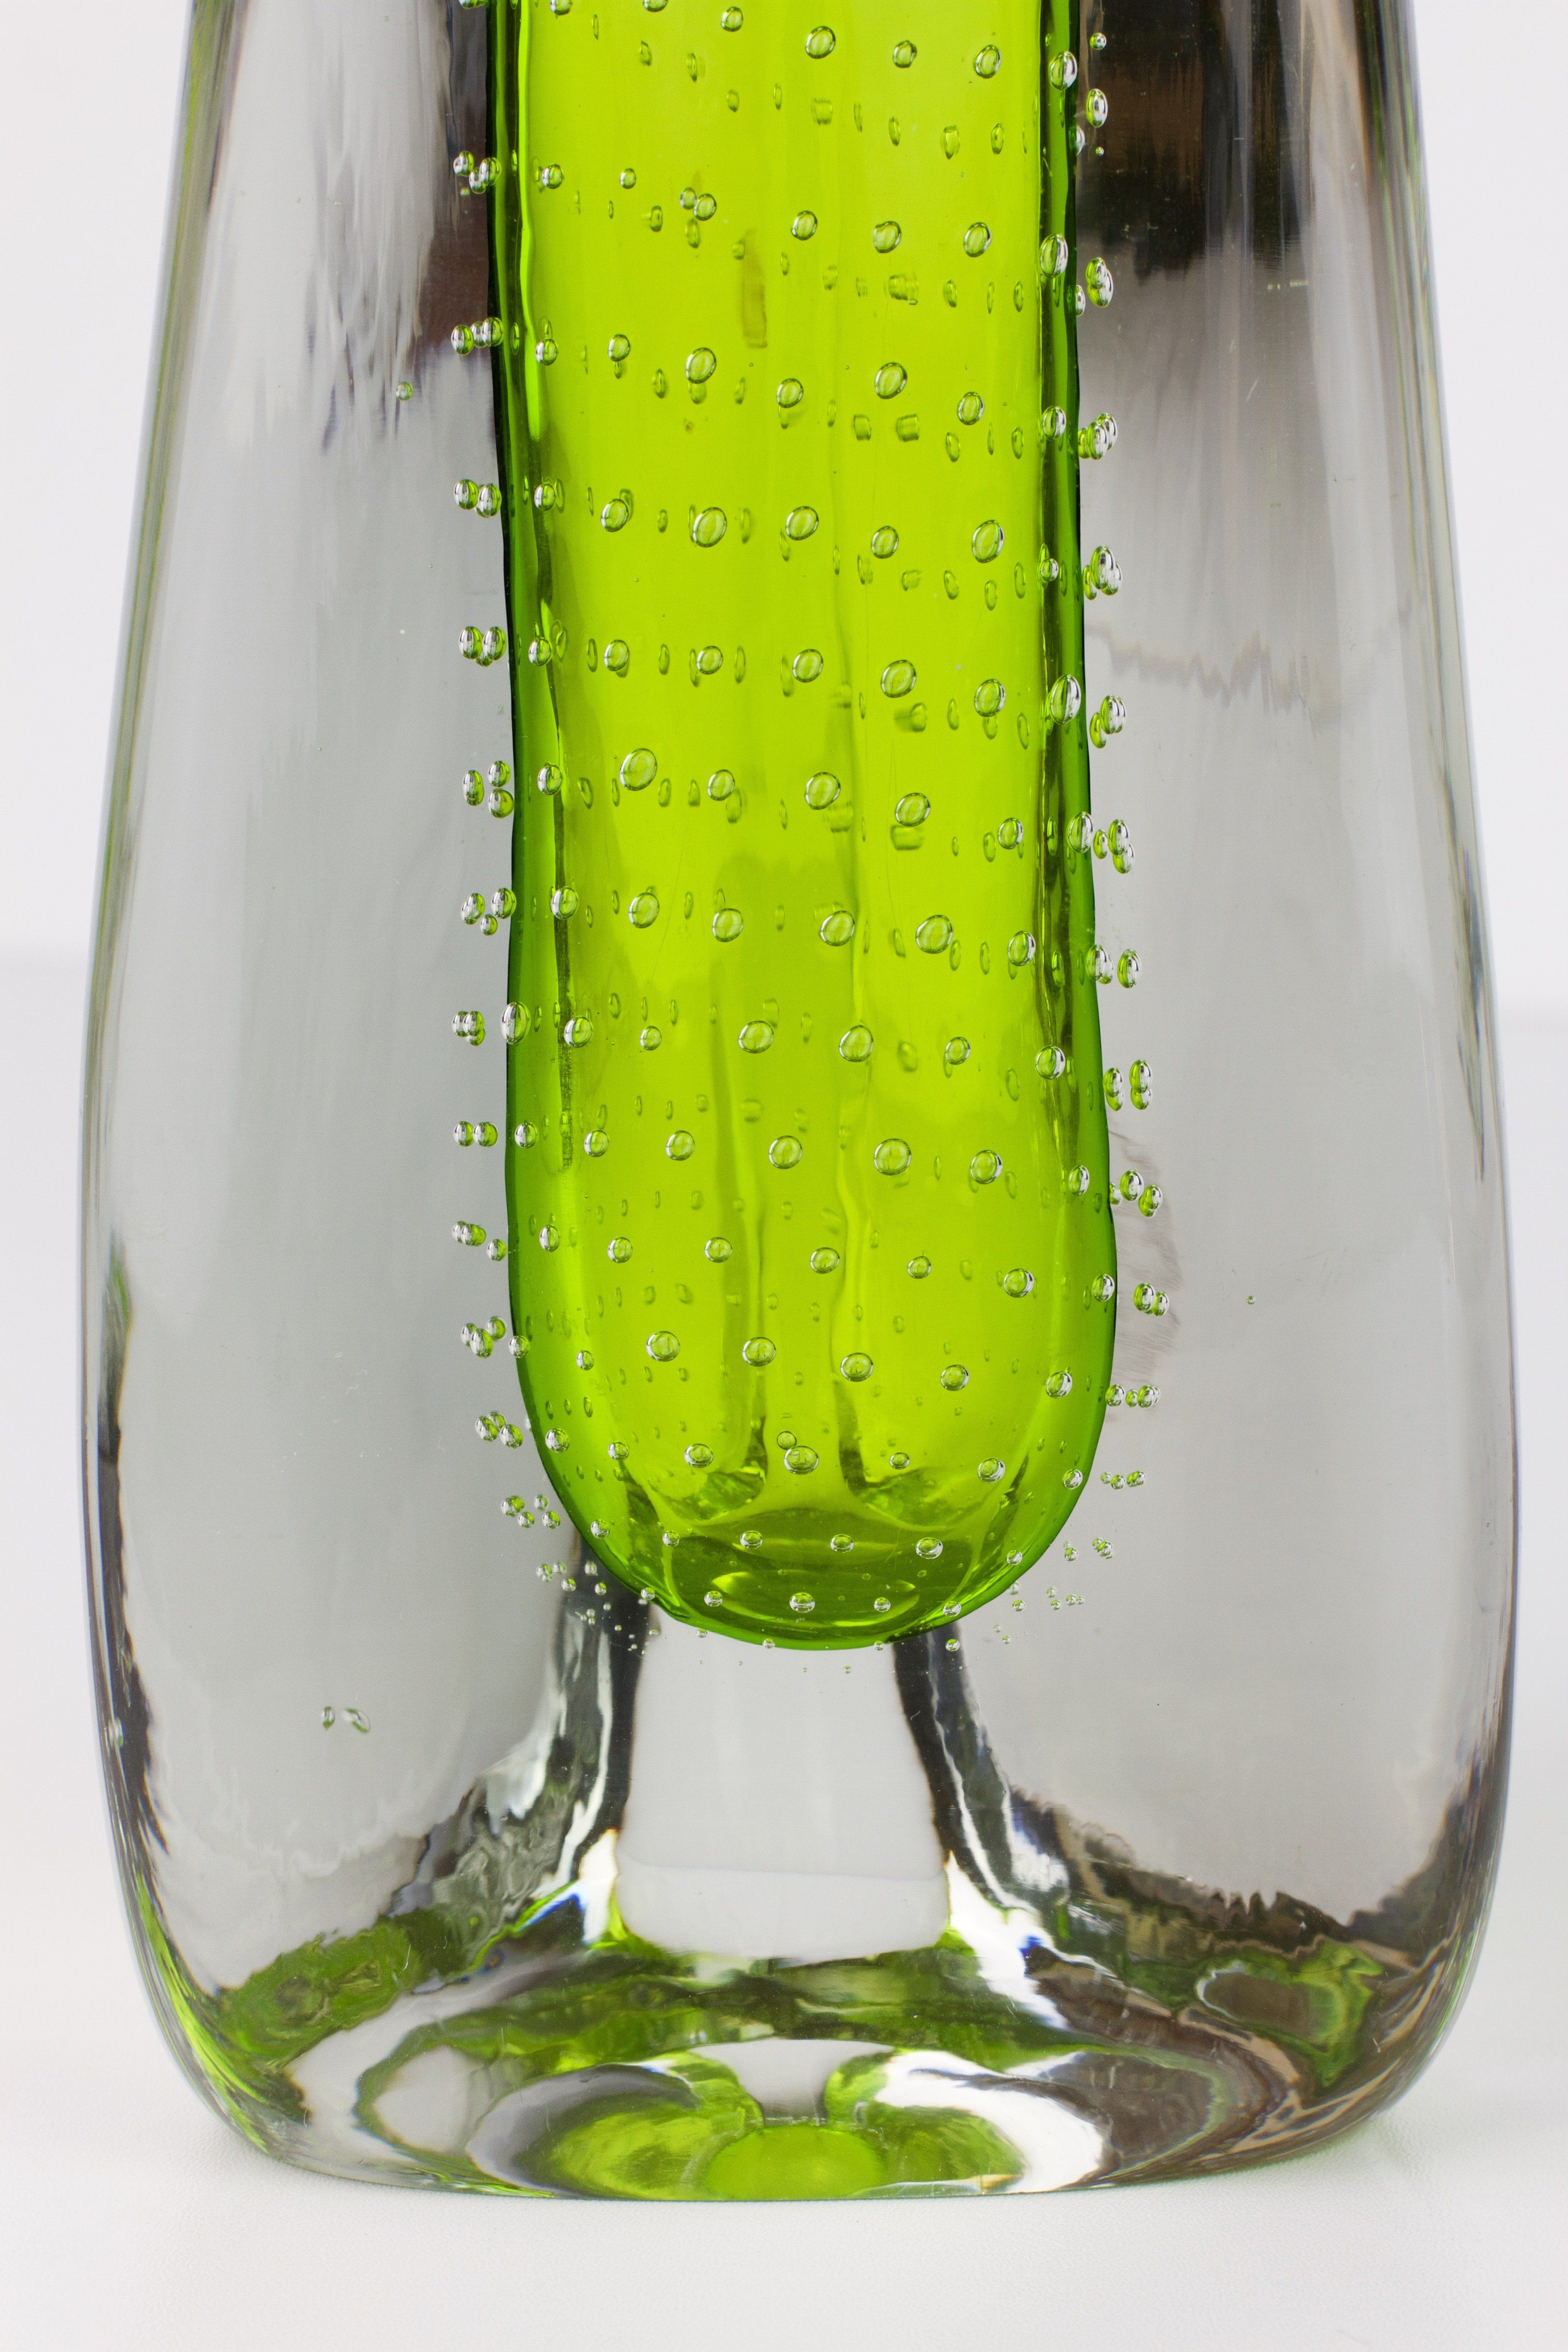 12 attractive Vintage Green Glass Bud Vase 2024 free download vintage green glass bud vase of 21 crystal glass vase the weekly world intended for and heavy 1970s german emerald green bubble ice glass vase